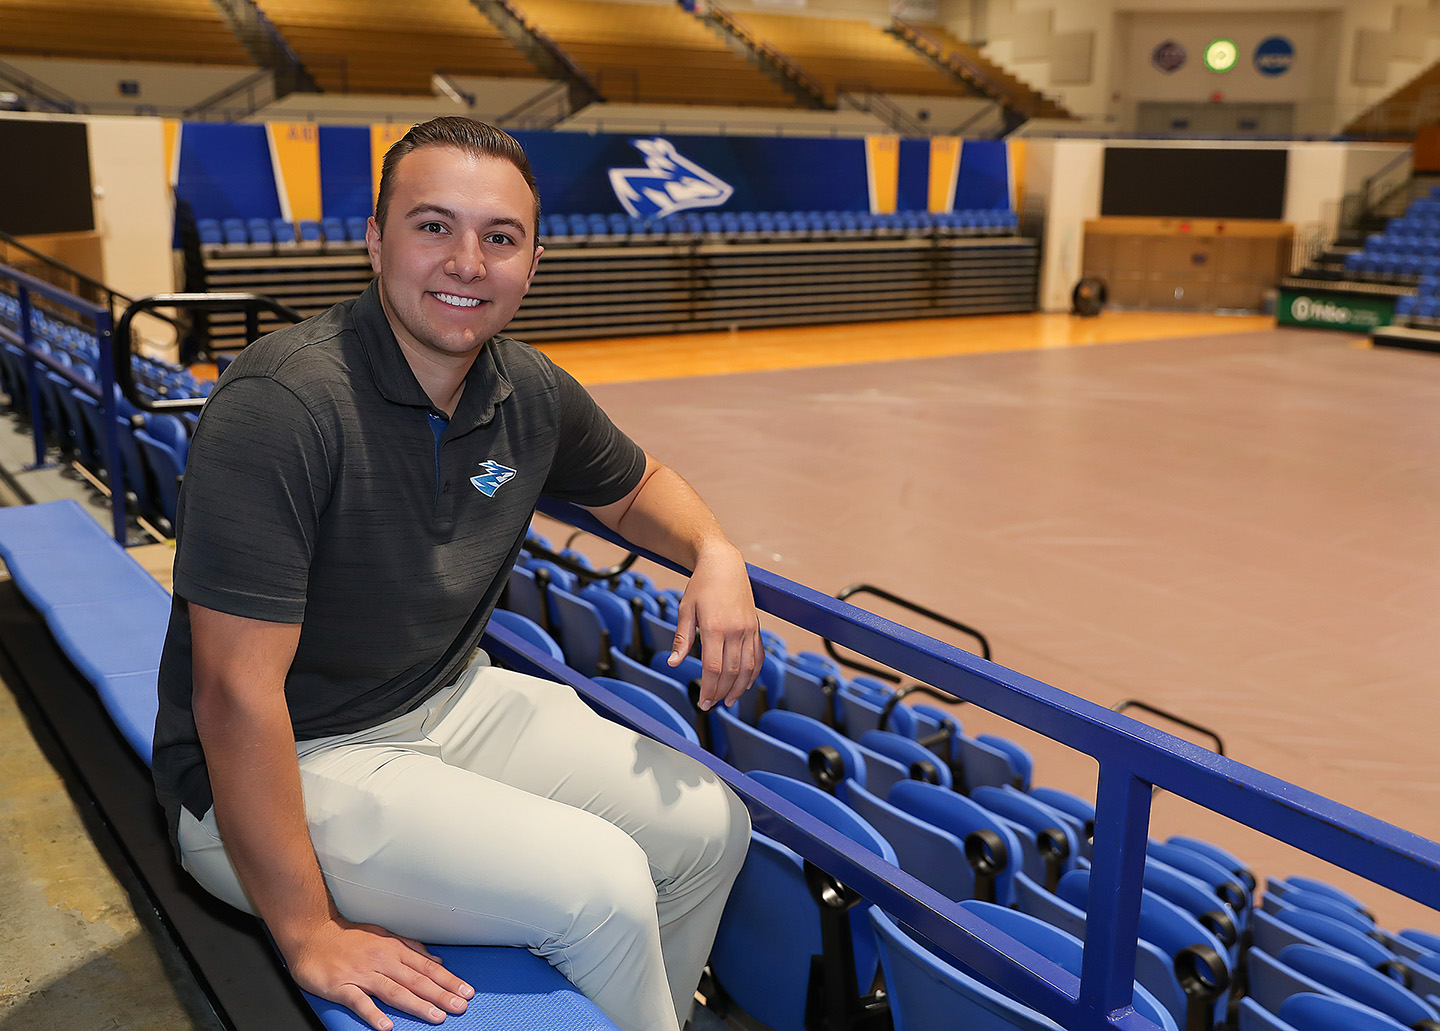 UNK spring graduate Jack Mohr gained hands-on experience in the sports industry through internships with UNK Athletics and Peak Sports MGMT. (Photos by Erika Pritchard, UNK Communications)